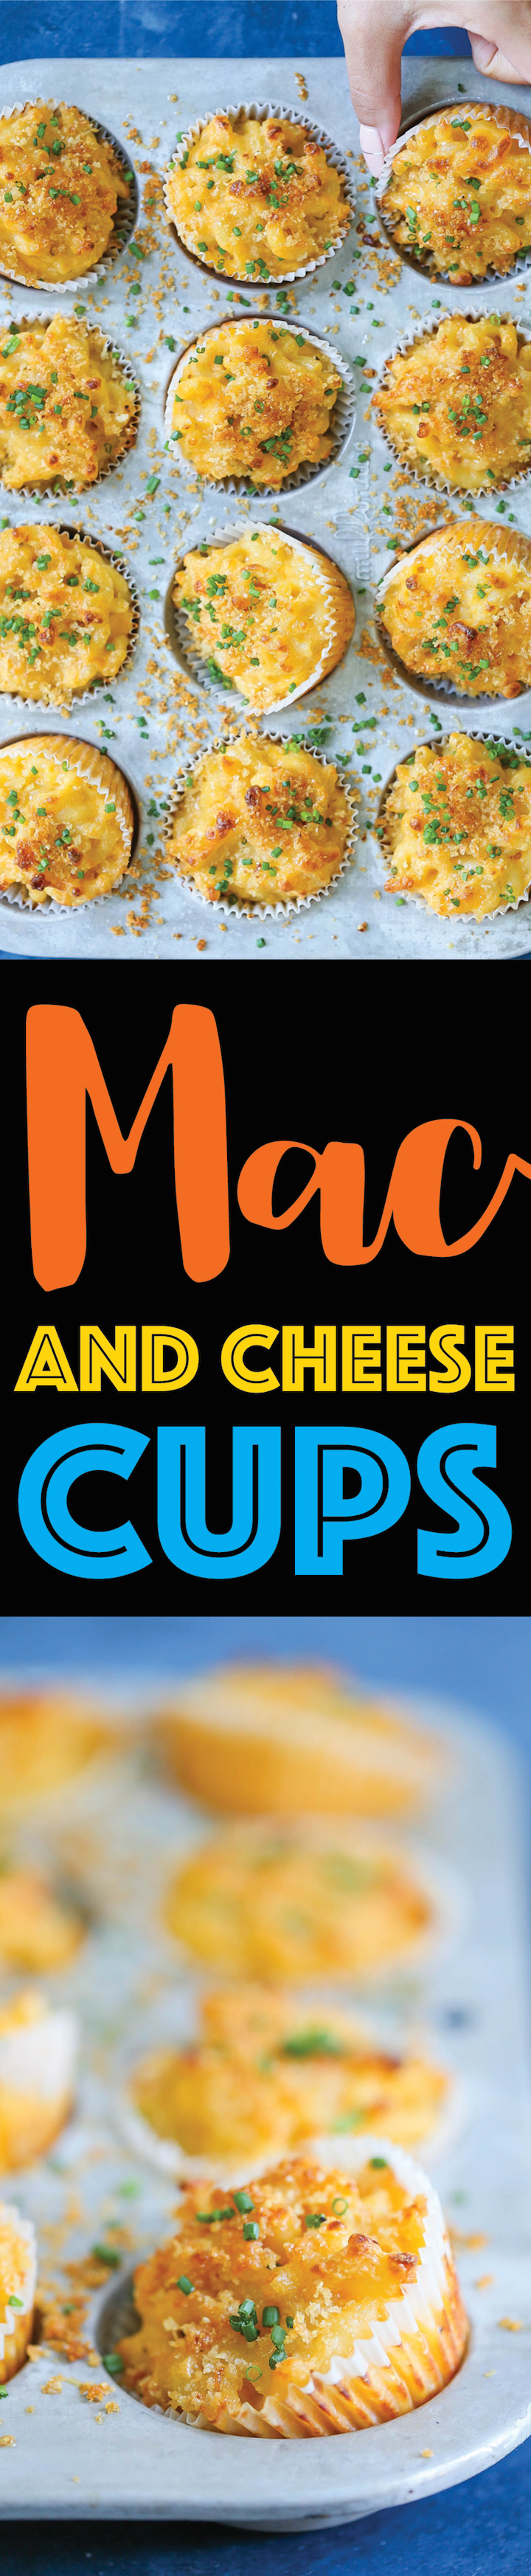 https://s23209.pcdn.co/wp-content/uploads/2017/11/Mac-and-Cheese-Cups.jpg